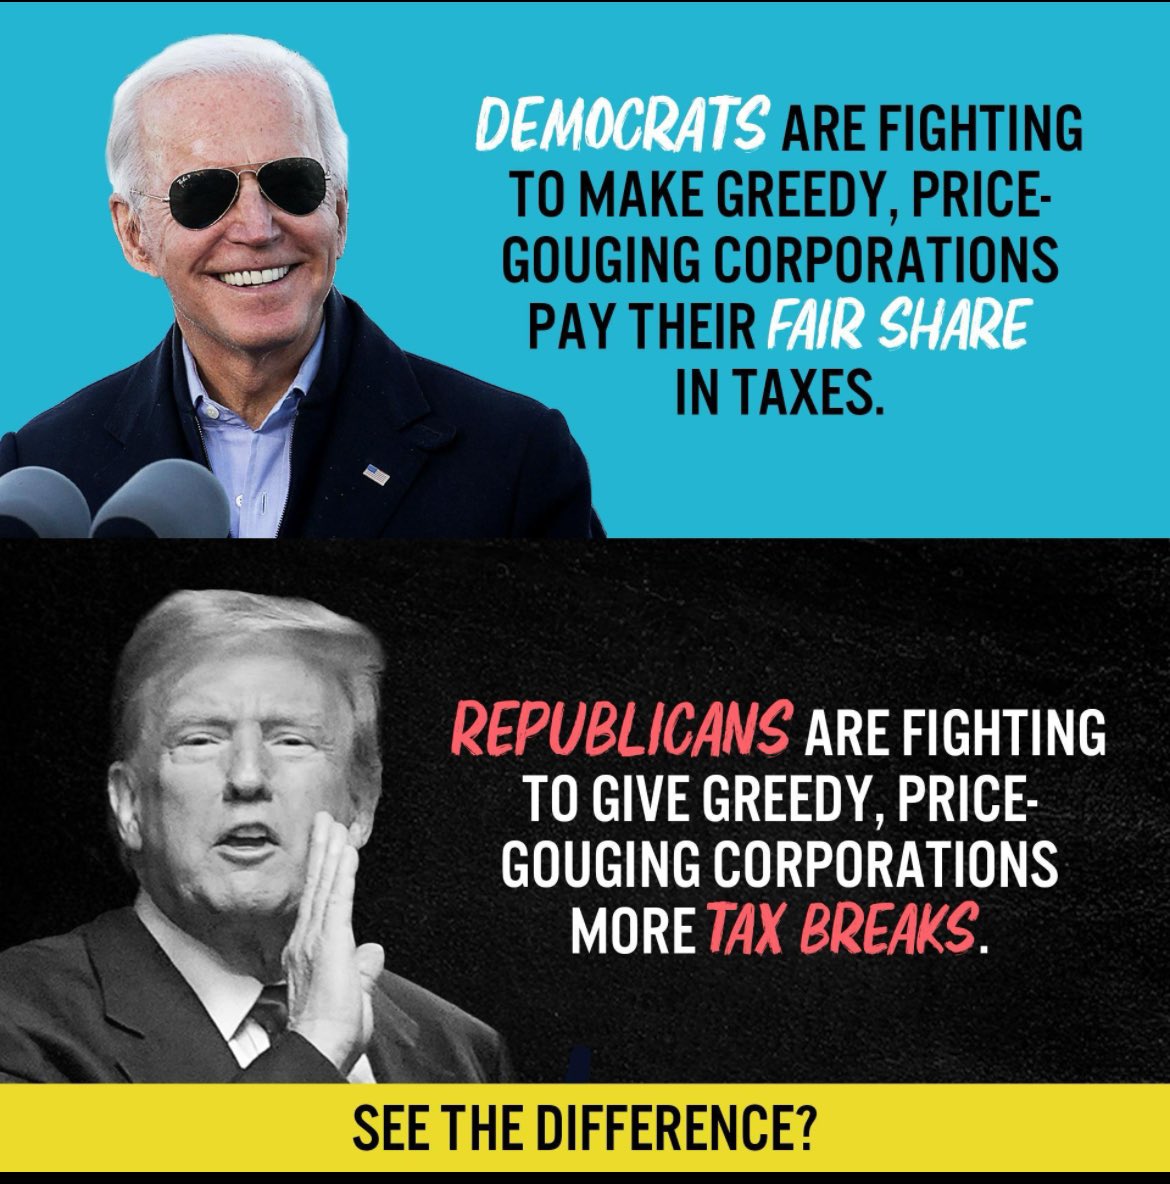 @NickKnudsenUS According to @Groundwork, corporate profits drove 53% of inflation in the second and third quarters of 2023. Smelvis Trump has pledged to give these greedy, price-gouging corporations more tax breaks. That’s Unacceptable‼️#BidenFightsPriceGouging‼️